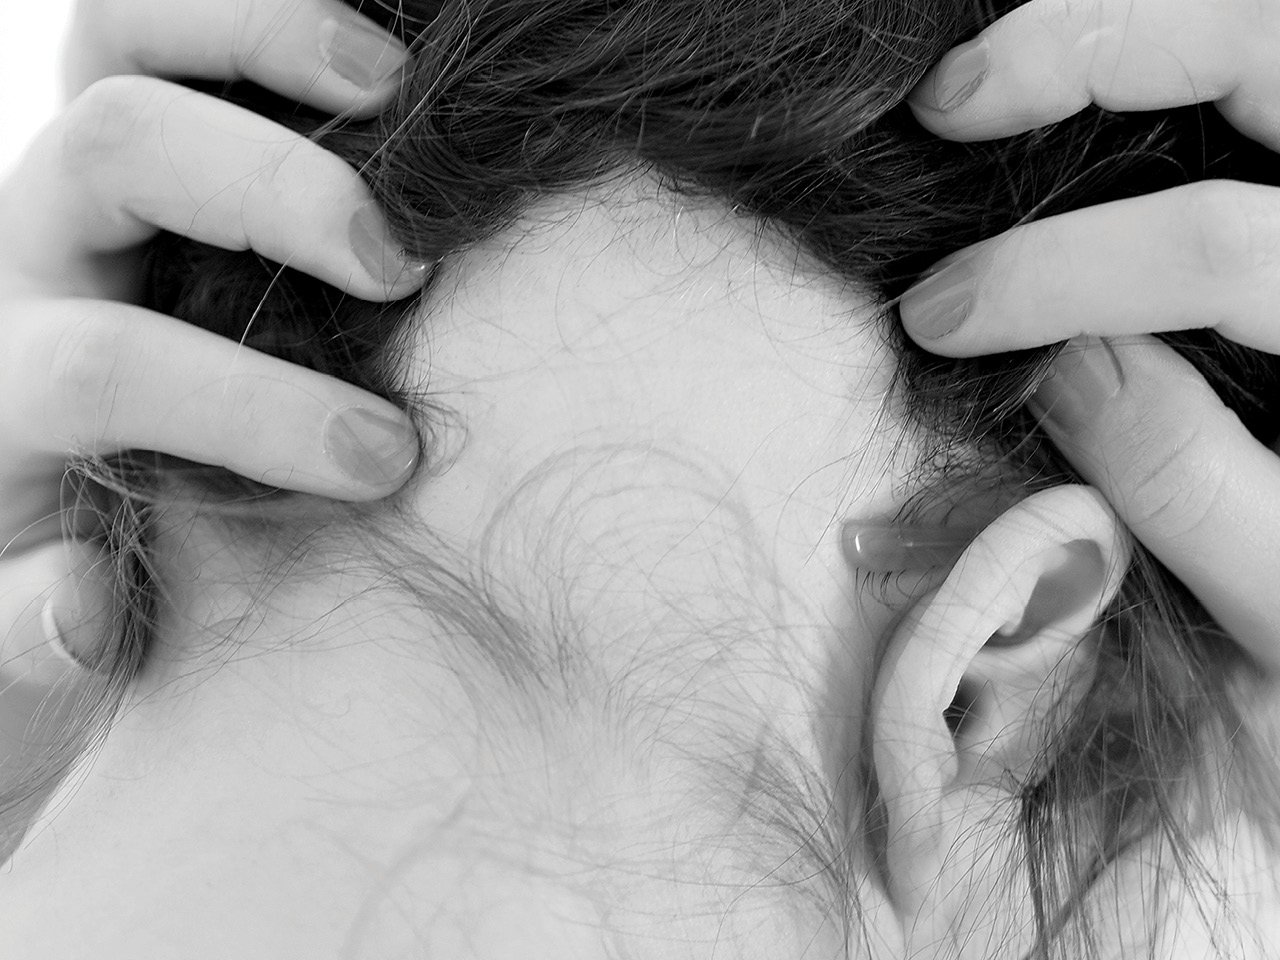 A large bald patch caused by alopecia areata.